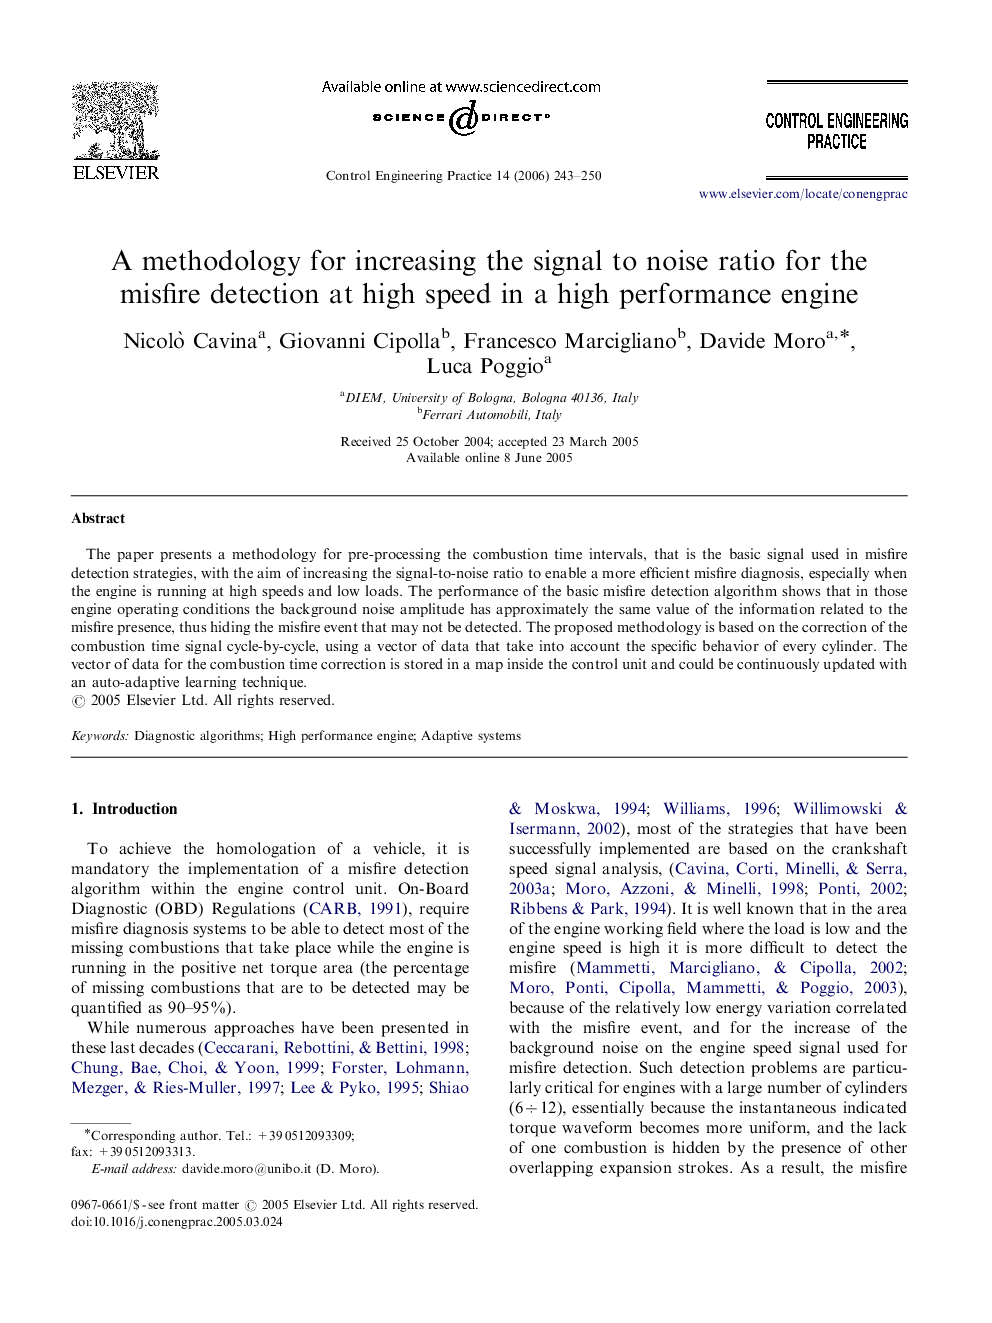 A methodology for increasing the signal to noise ratio for the misfire detection at high speed in a high performance engine